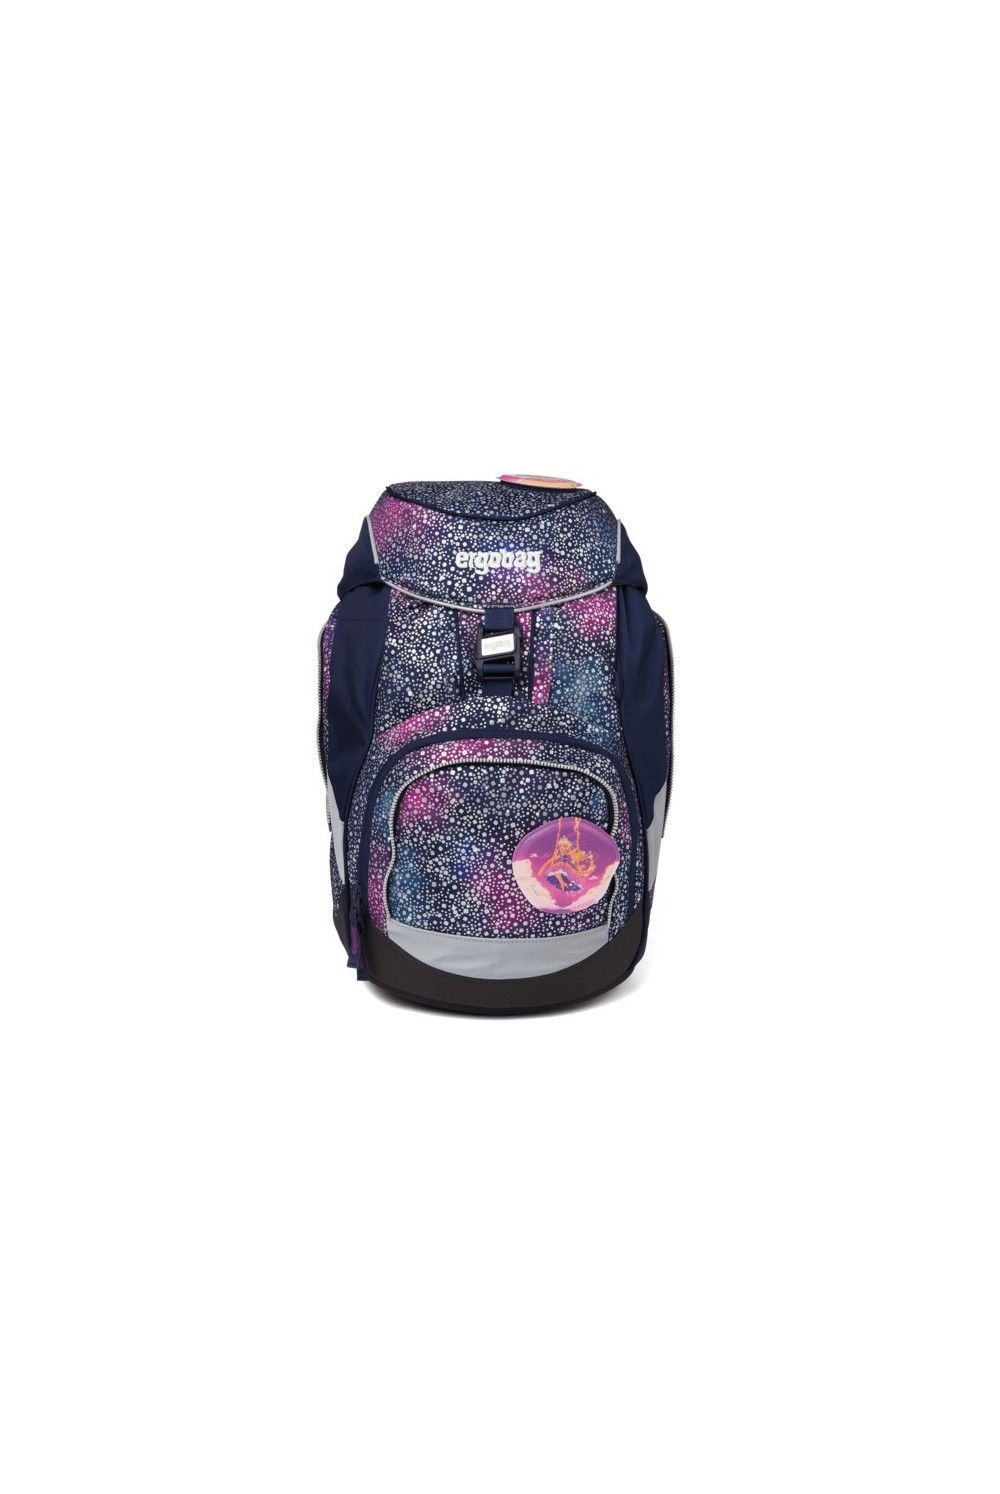 ergobag pack school backpack set 6 pieces Limited Edition Bärlaxy